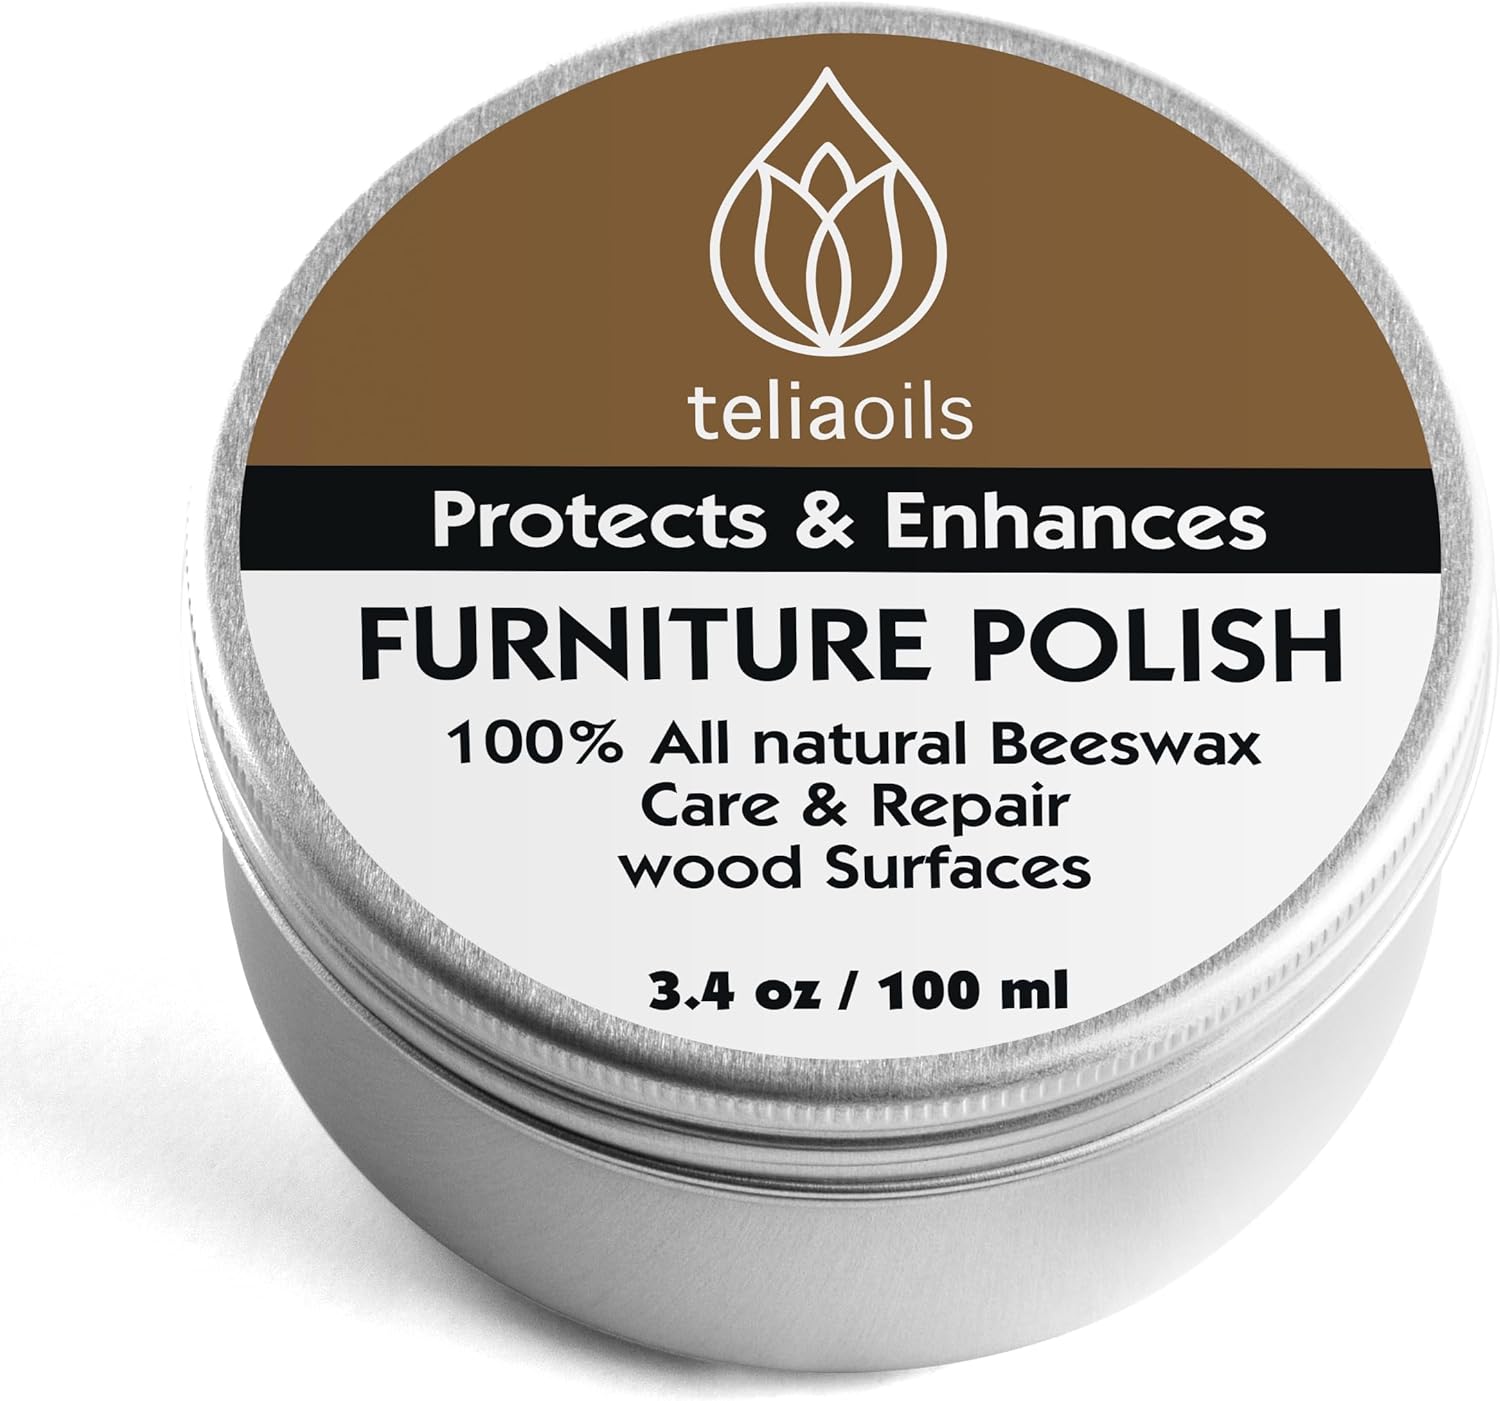 Beeswax Furniture Polish, 100% natural, for any kind of wood, nourishing, renewing, sealing, covering scratches, protecting from drying out, restoring wood’s natural beauty. The best wood wax cream